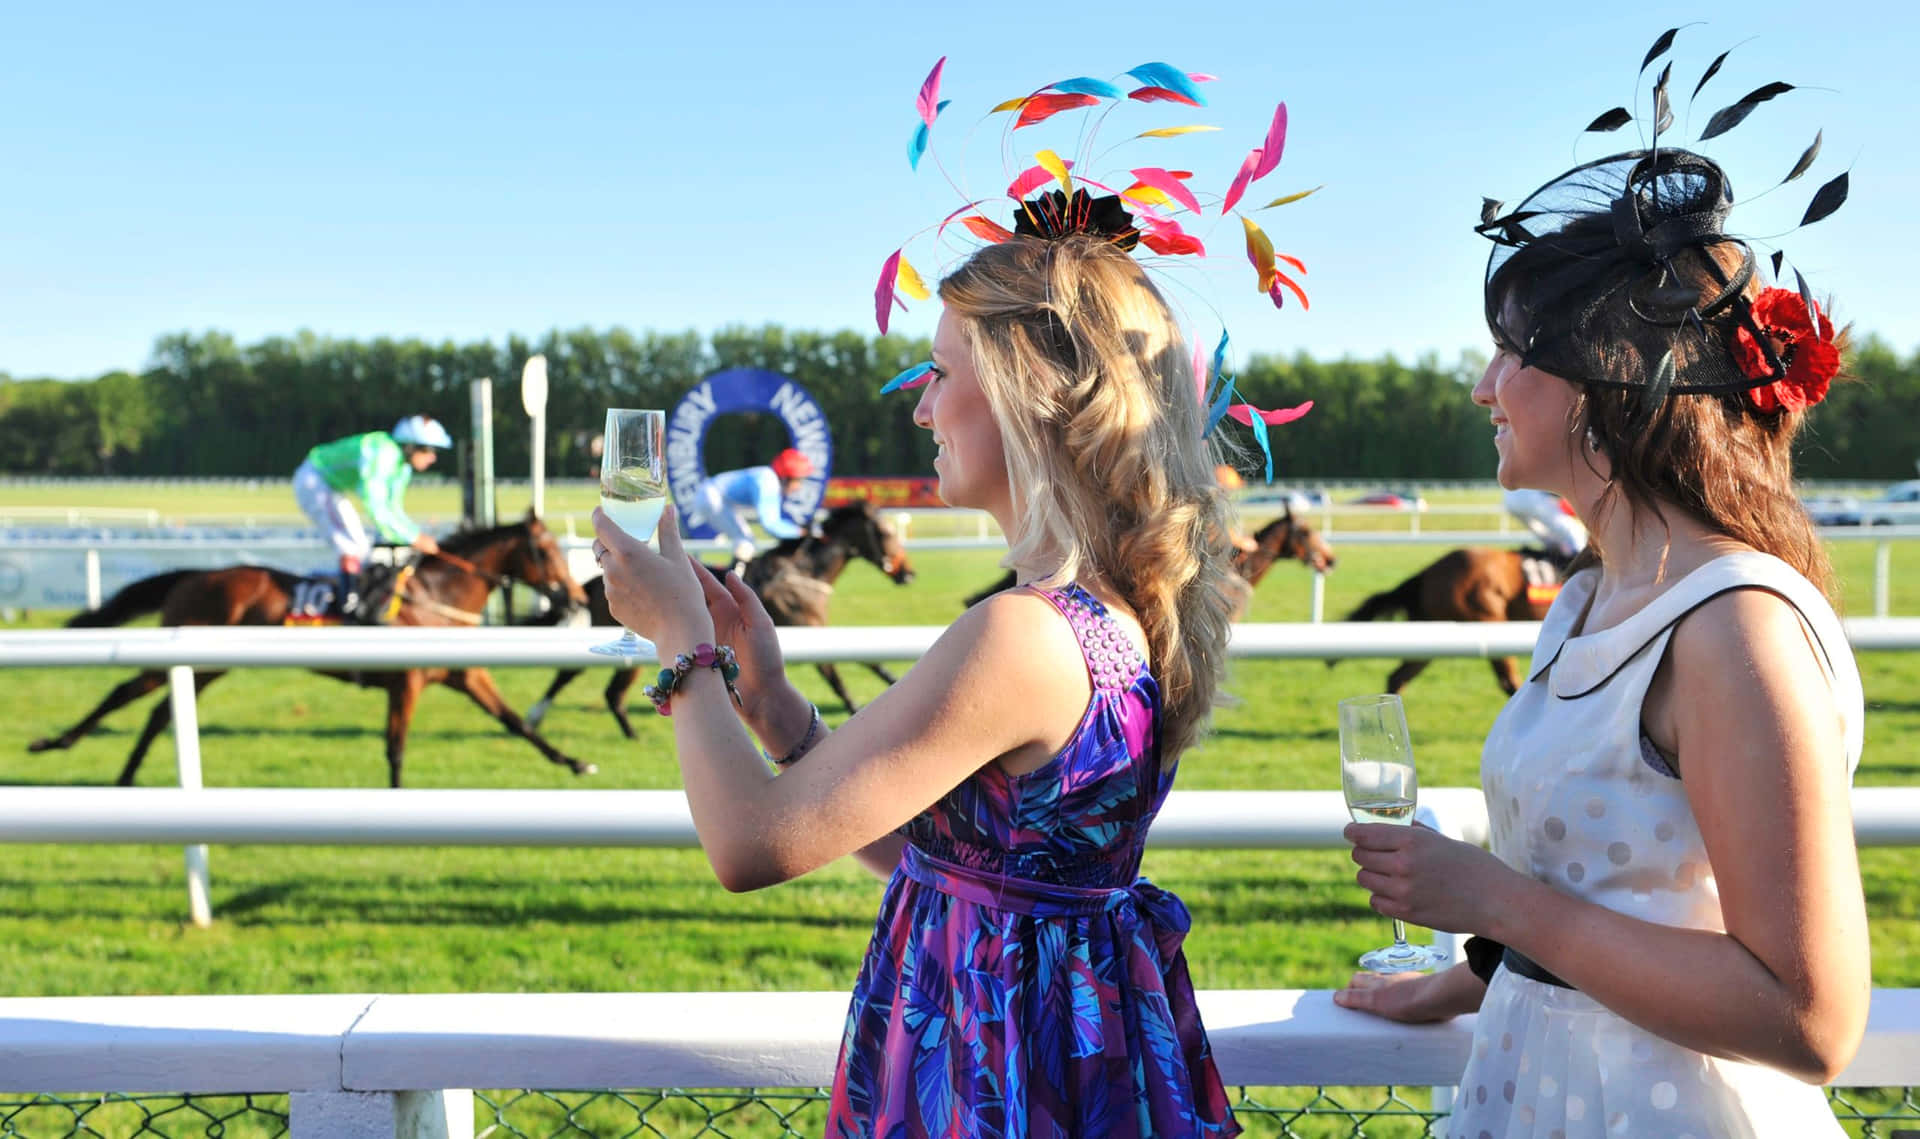 Excitement And Elegance At The Melbourne Cup Day Wallpaper